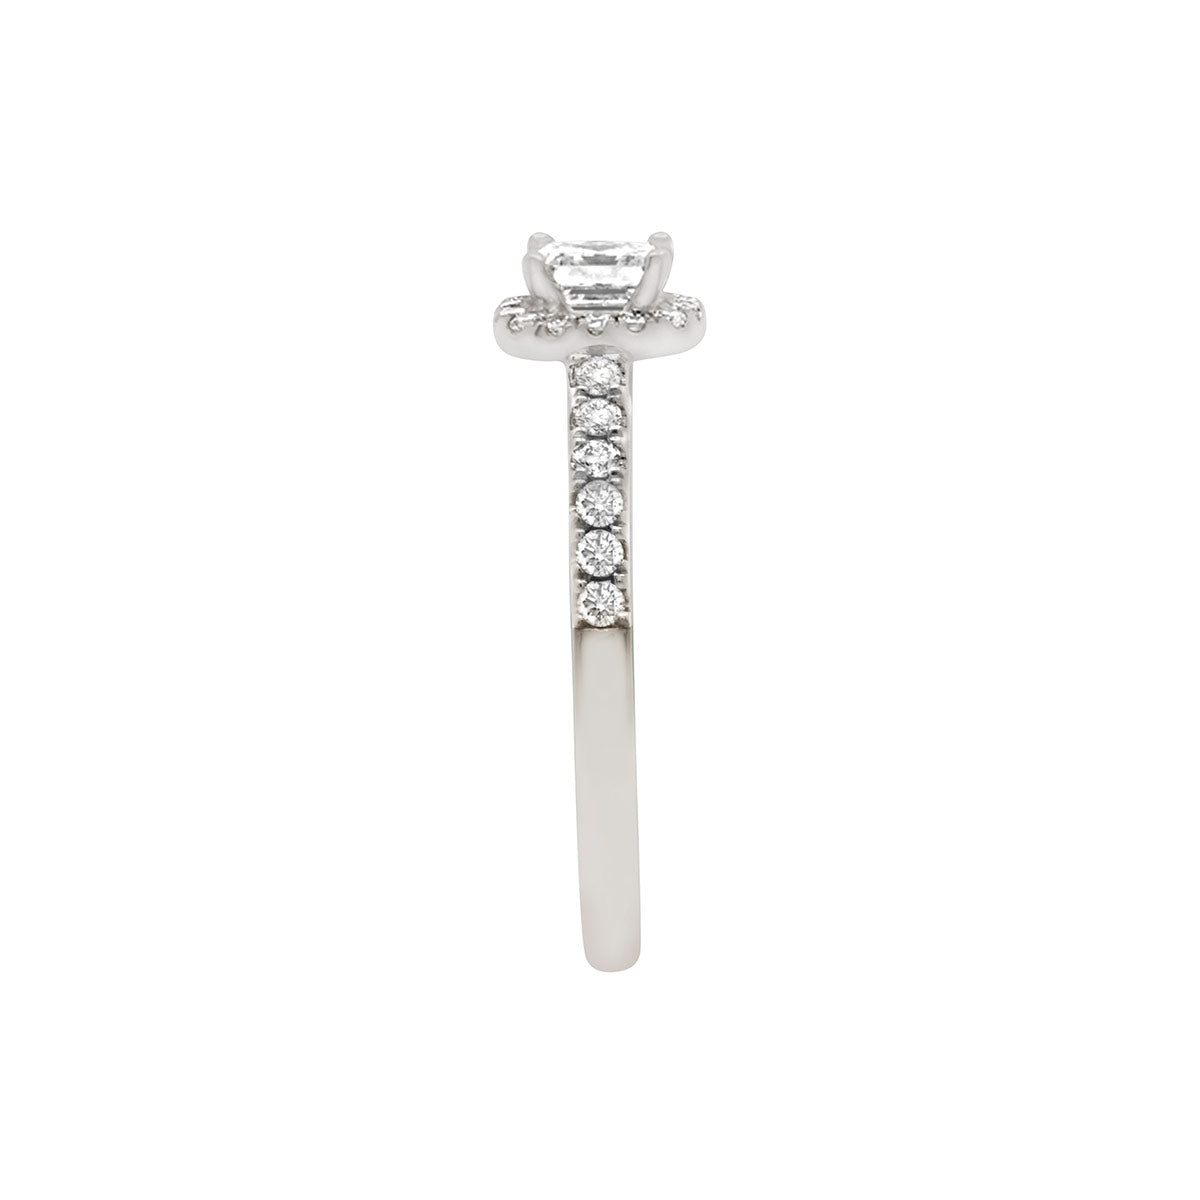 Asscher Halo Diamond Ring in white gold FROM A SIDE VIEW